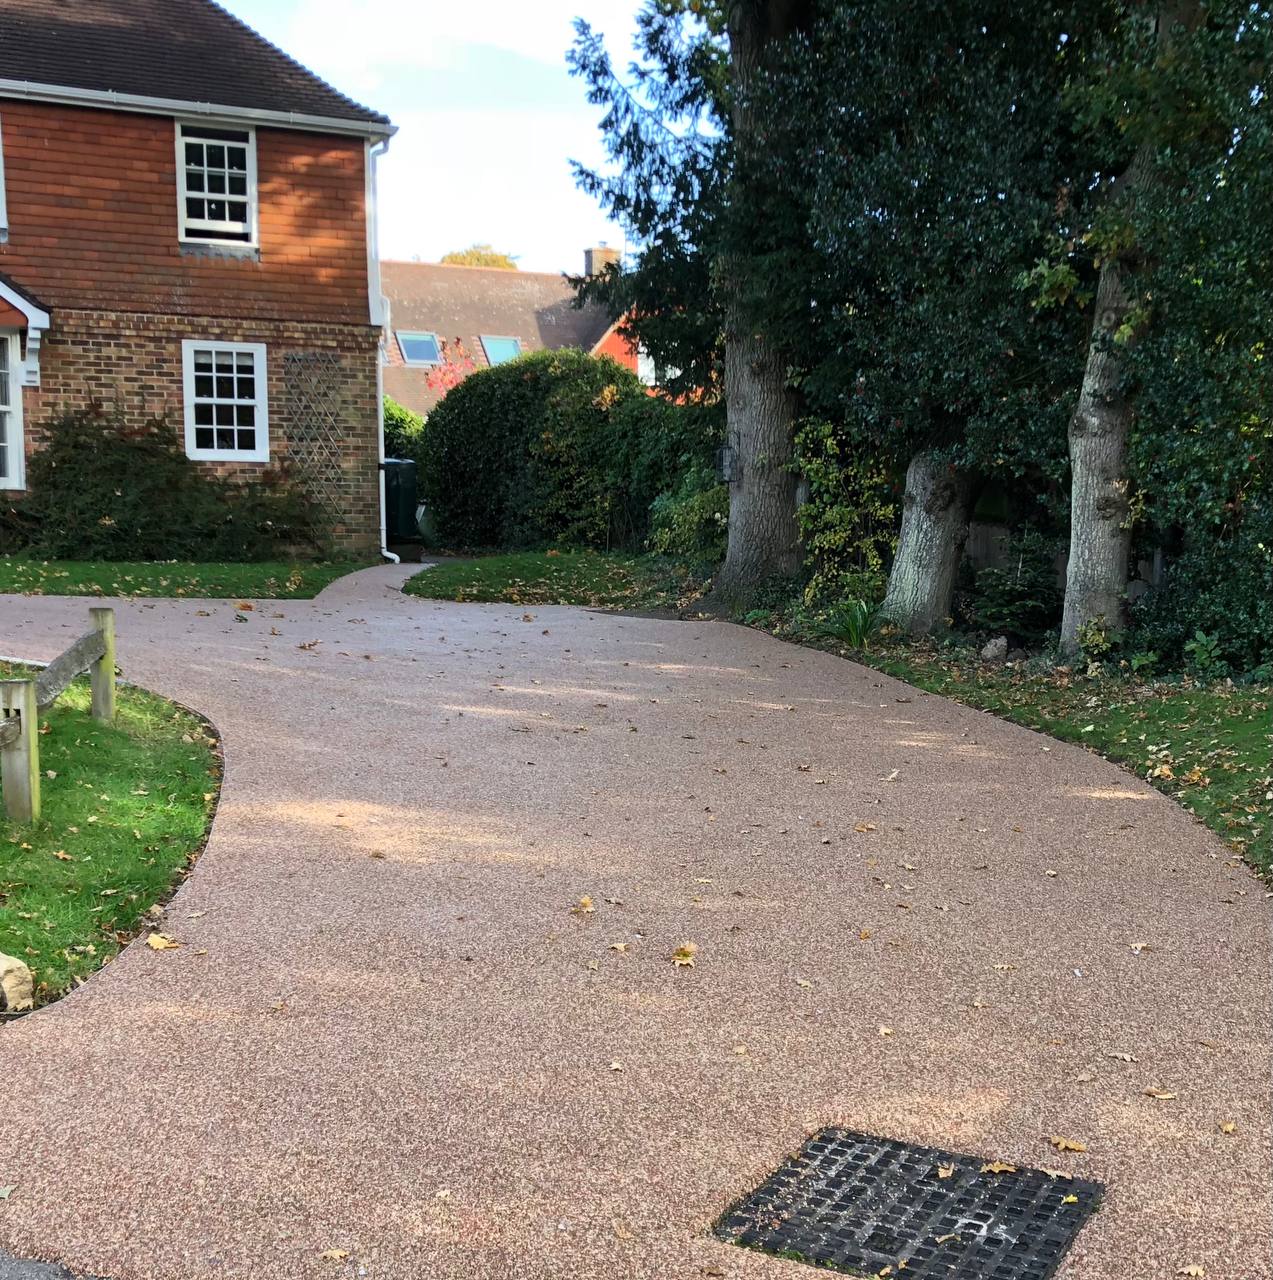 This is a photo of a Resin bound driveway carried out in a district of Cardiff. All works done by Resin Driveways Cardiff